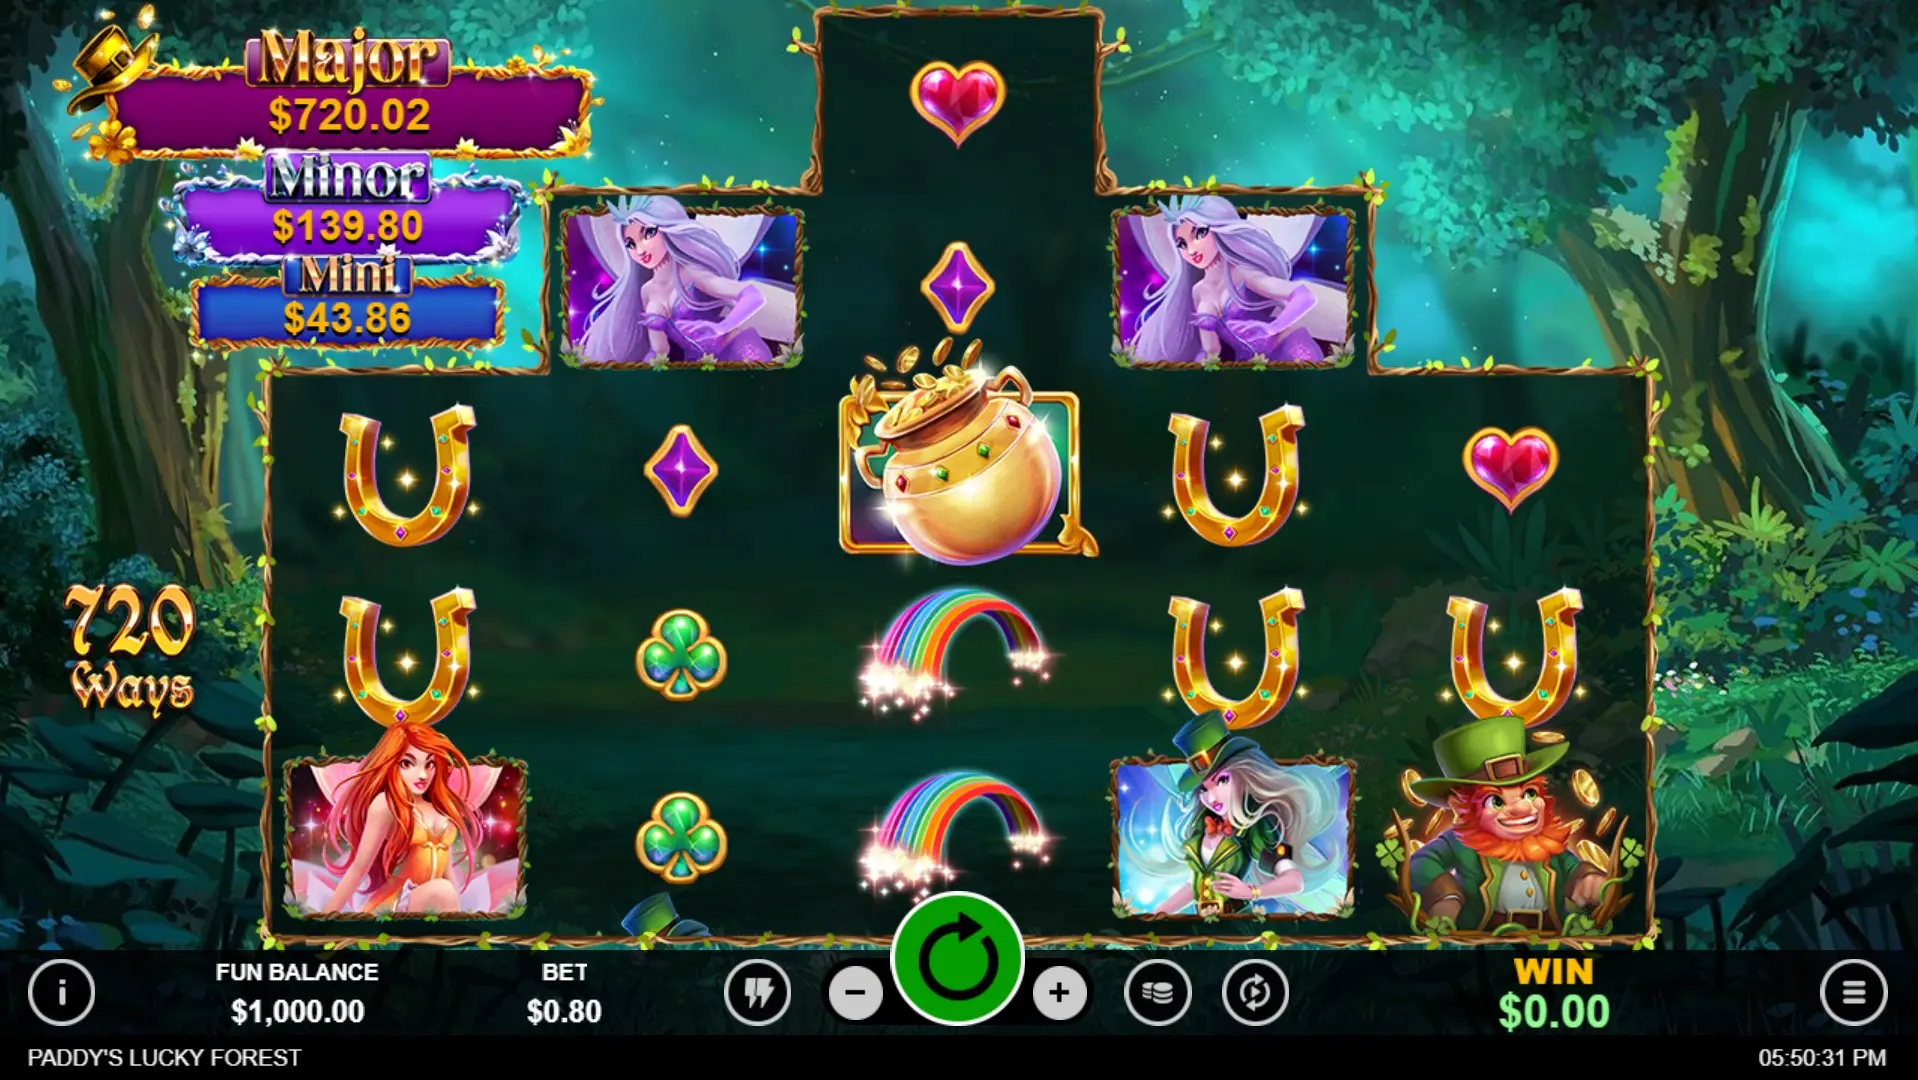 50 Free Spins on Paddy's Lucky Forest at Ozwin Casino